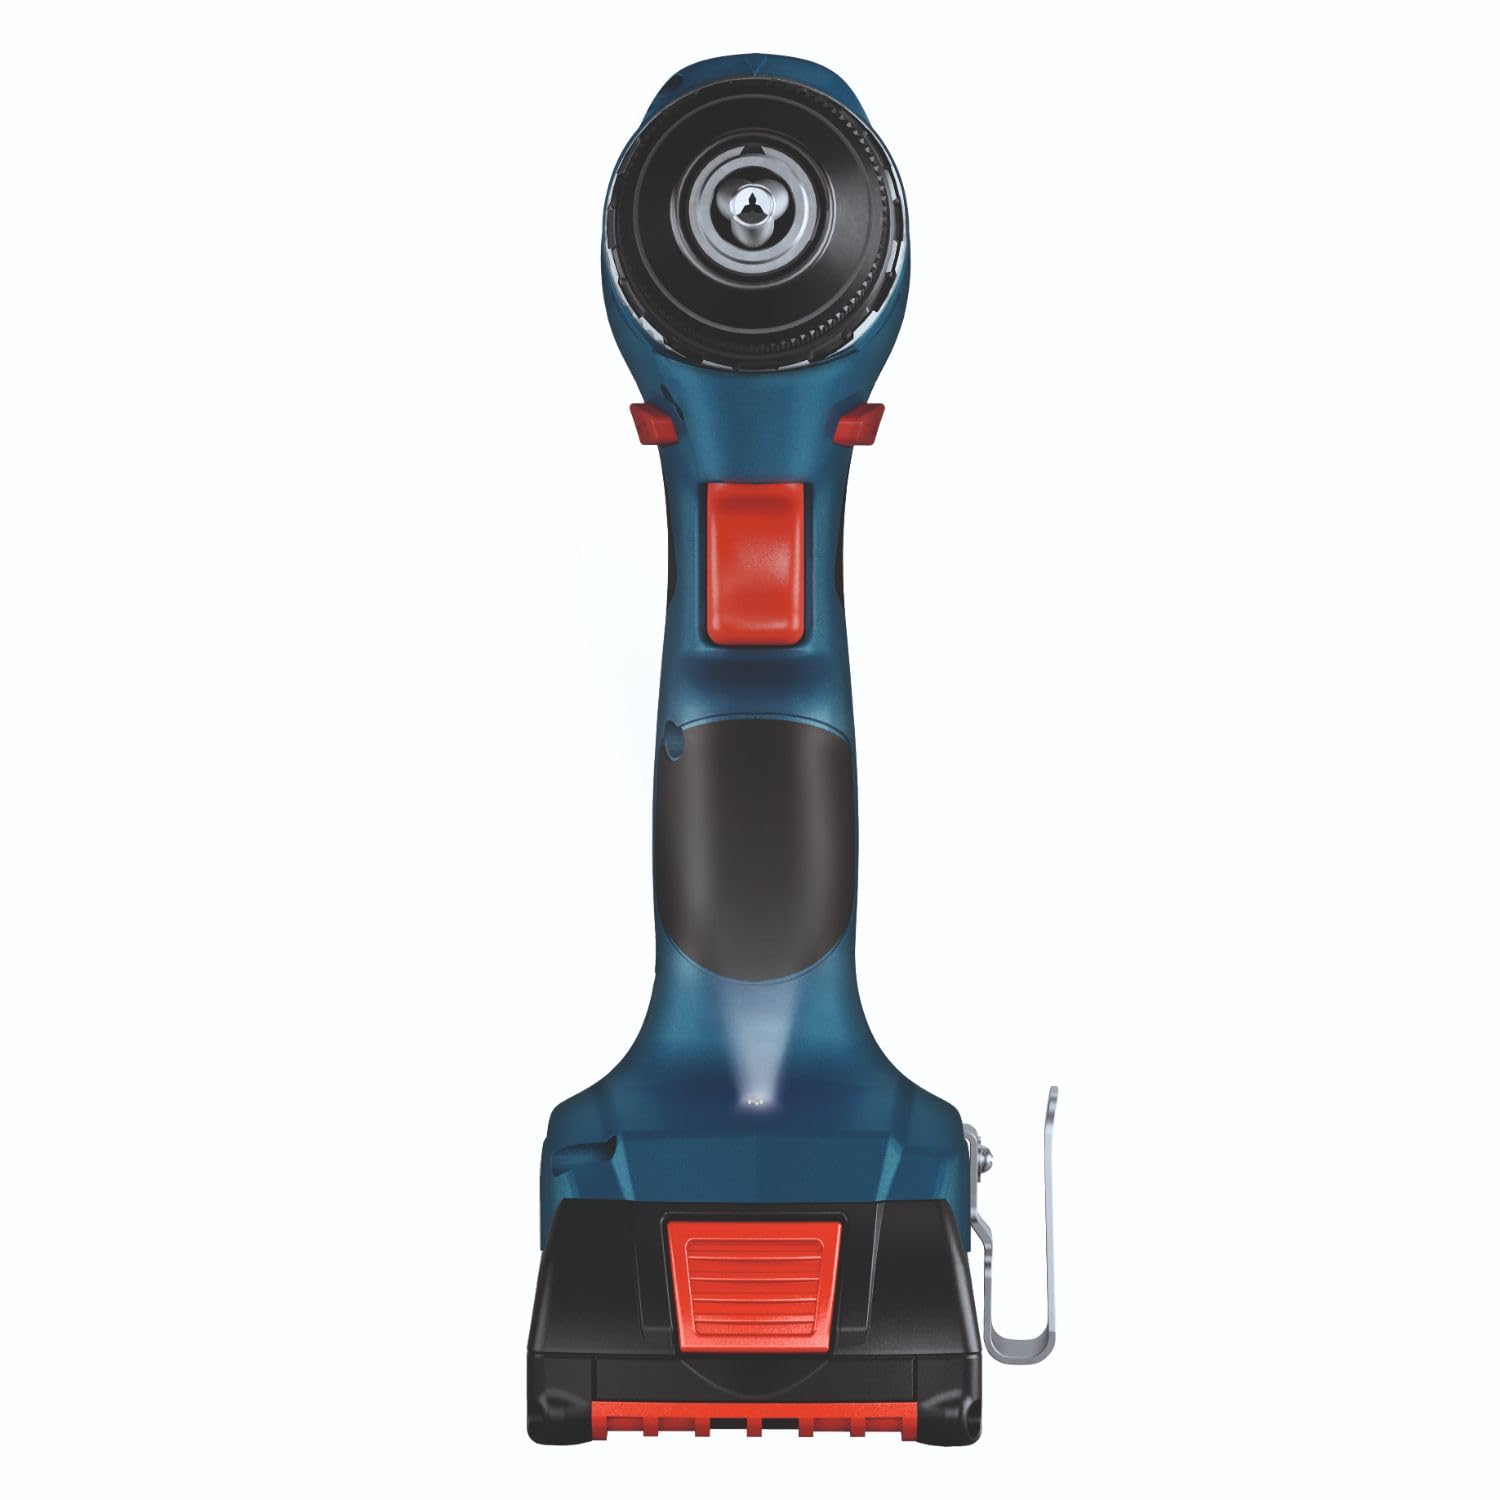 BOSCH GSR18V-400B22 18V Compact Brushless 1/2 In. Drill/Driver Kit with (2) 2 Ah Standard Batteries